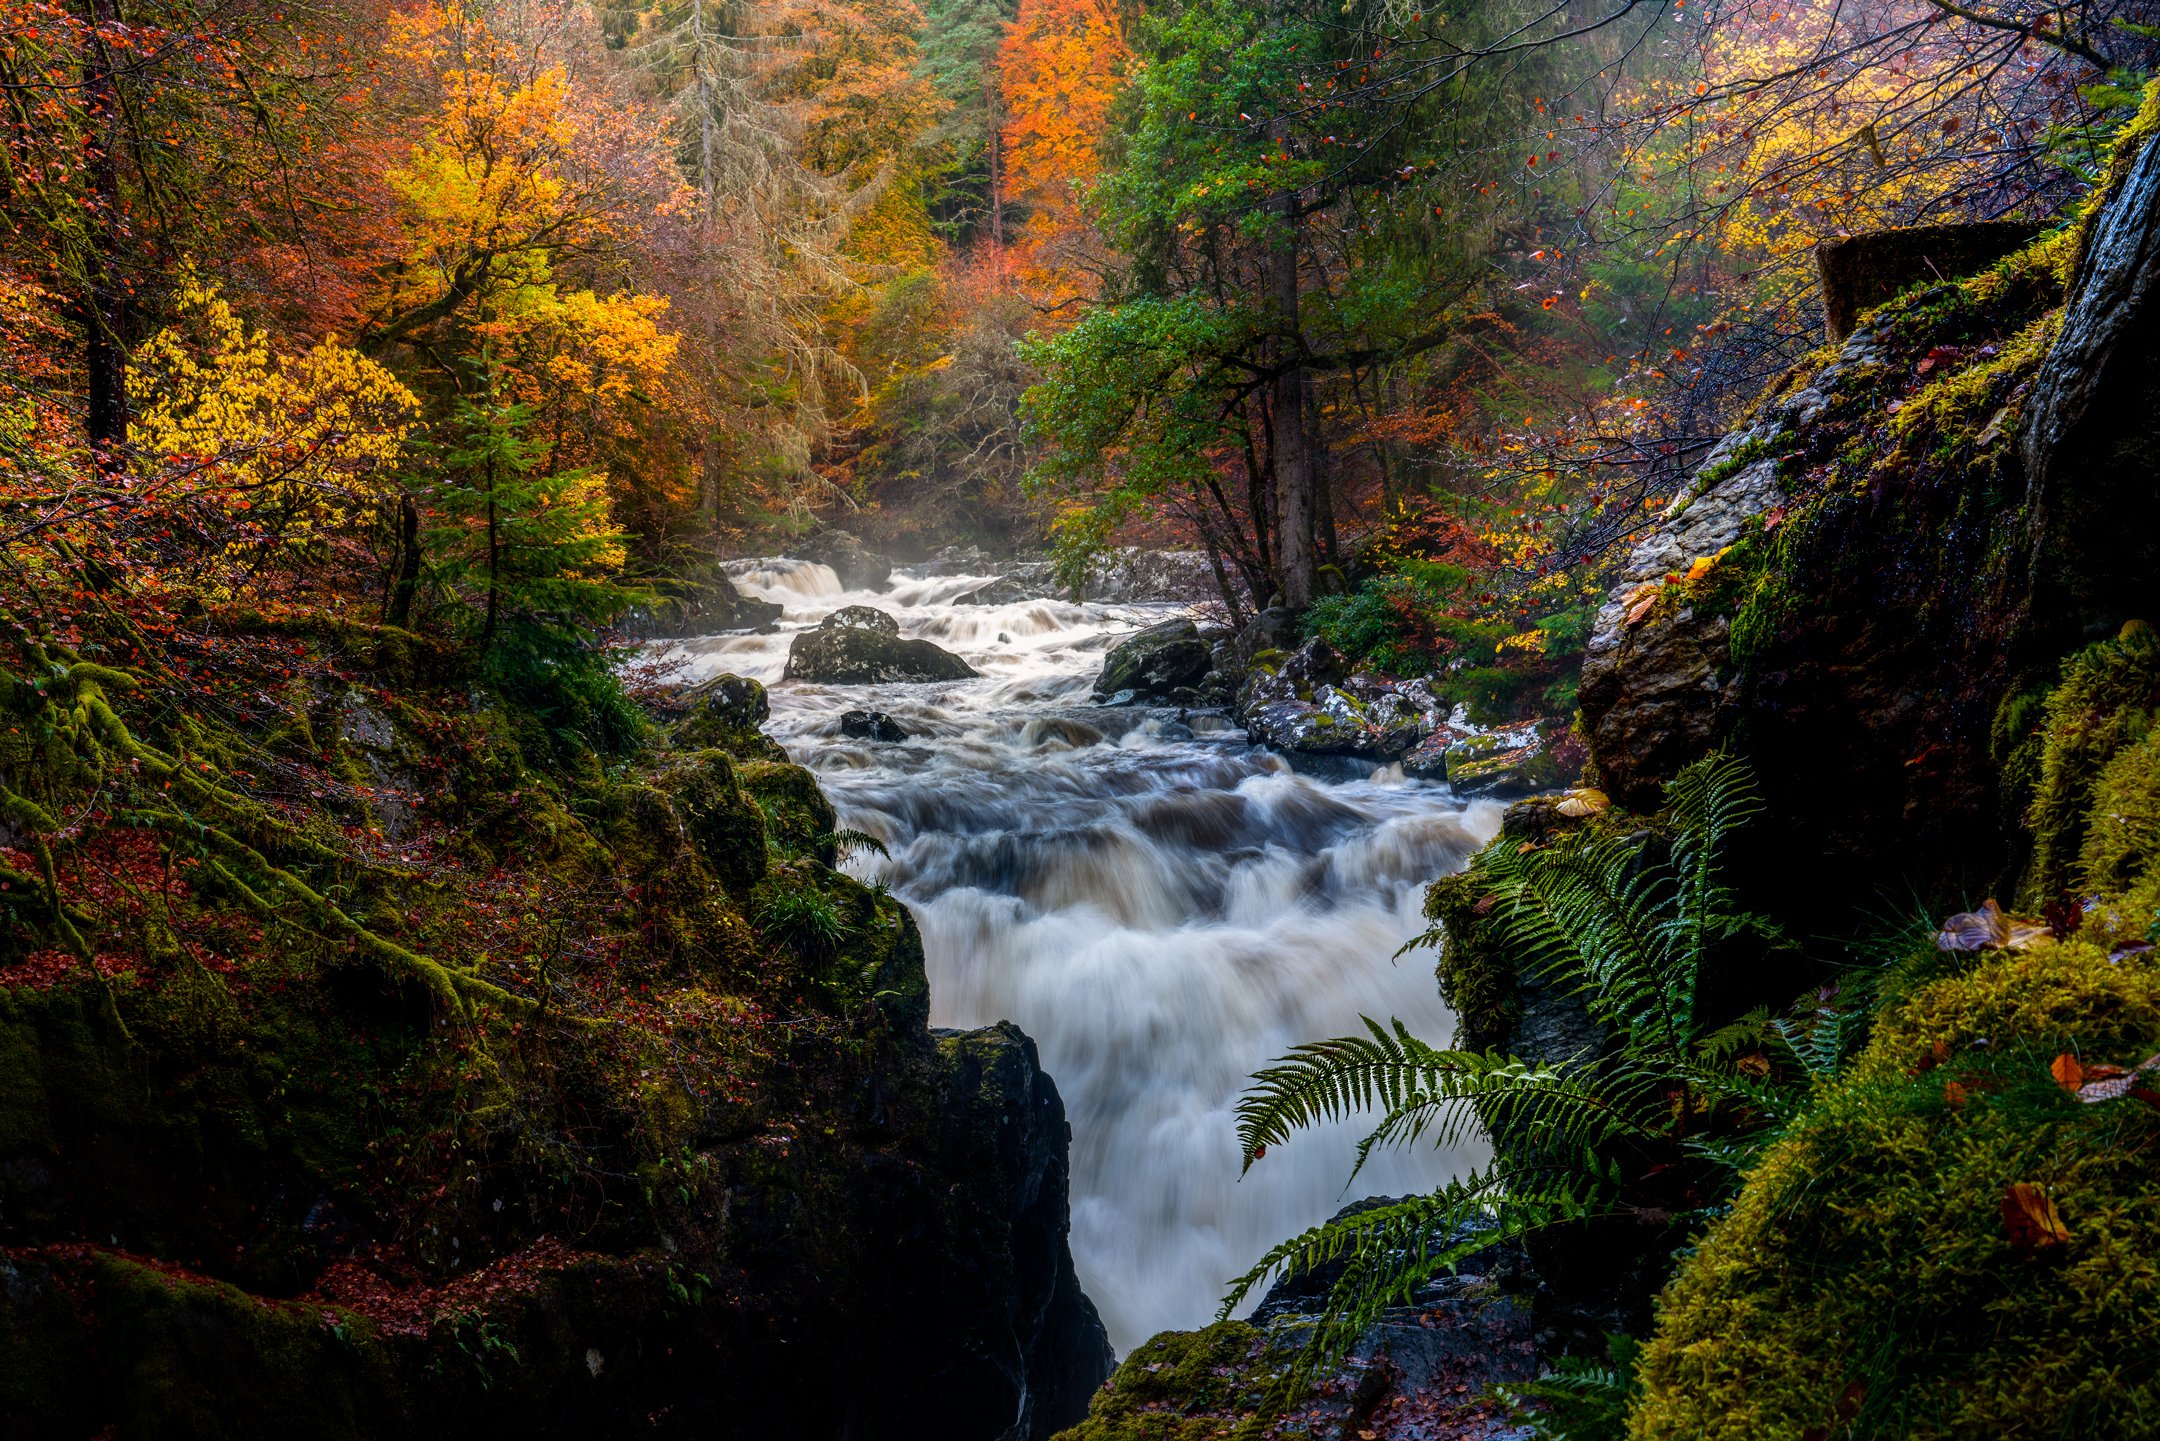 Perthshire & Stirlingshire Photography Workshop & Tour